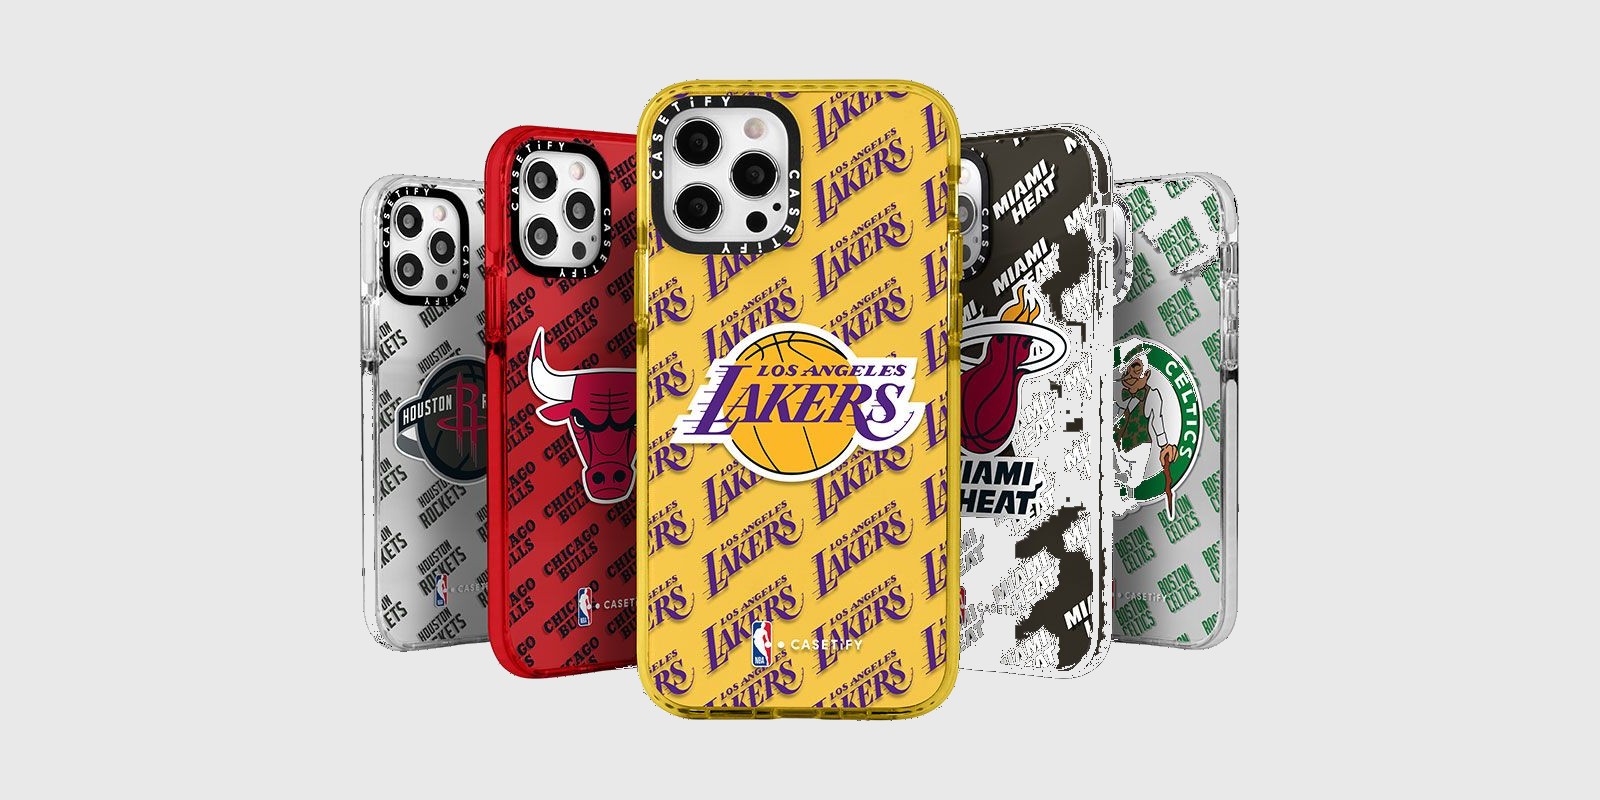 CASETiFY's new NBA collection brings hometown pride to your Apple gear